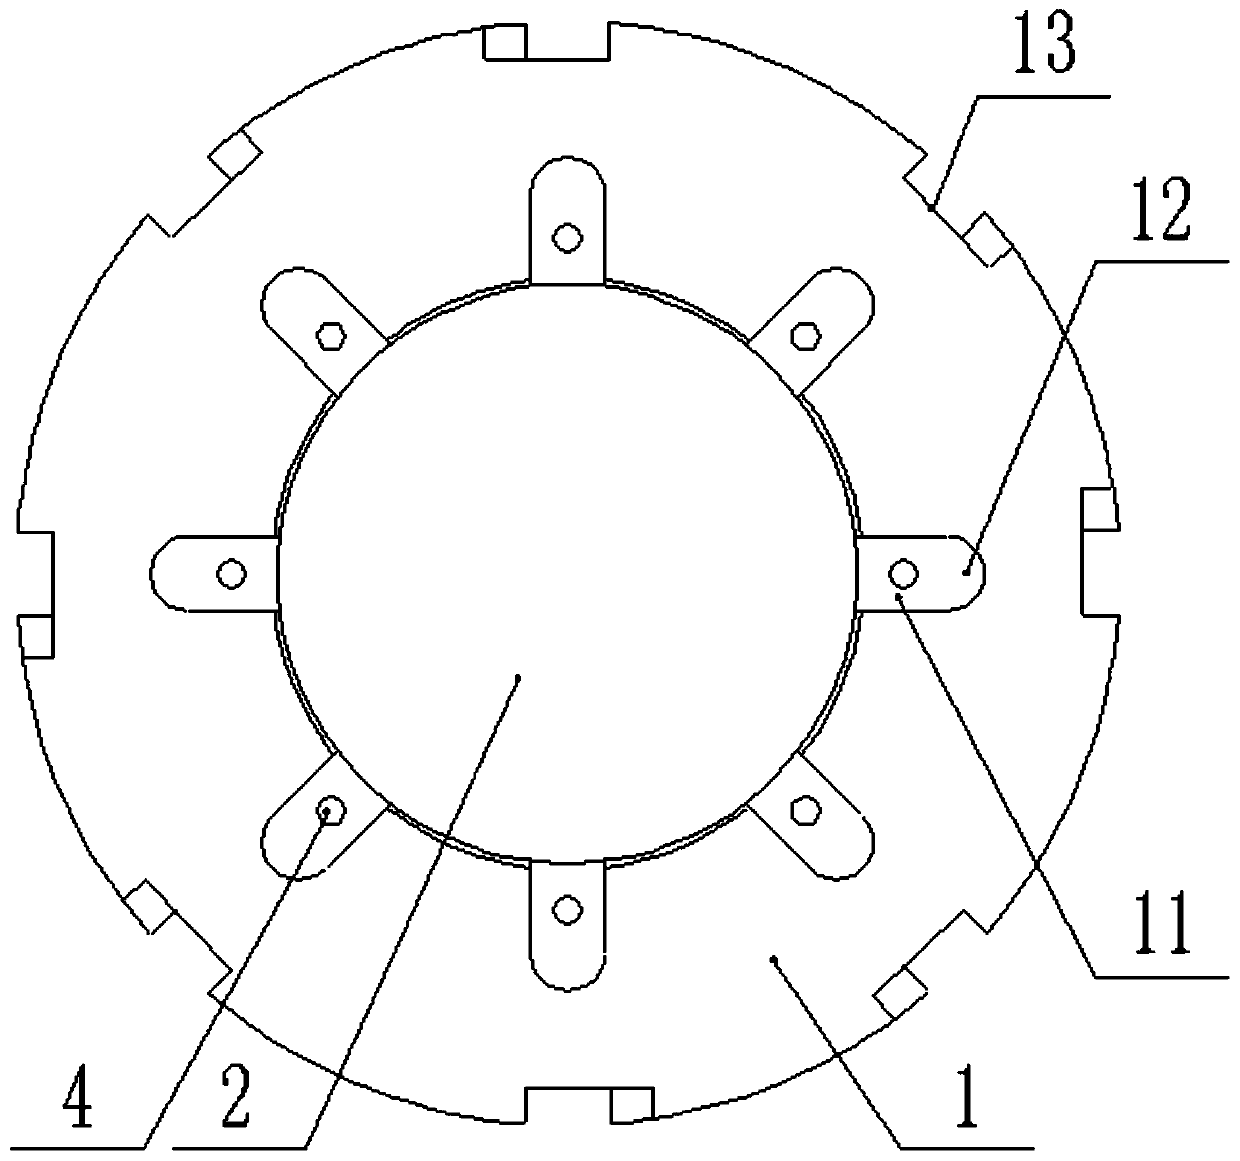 Locking structure of slotted nut